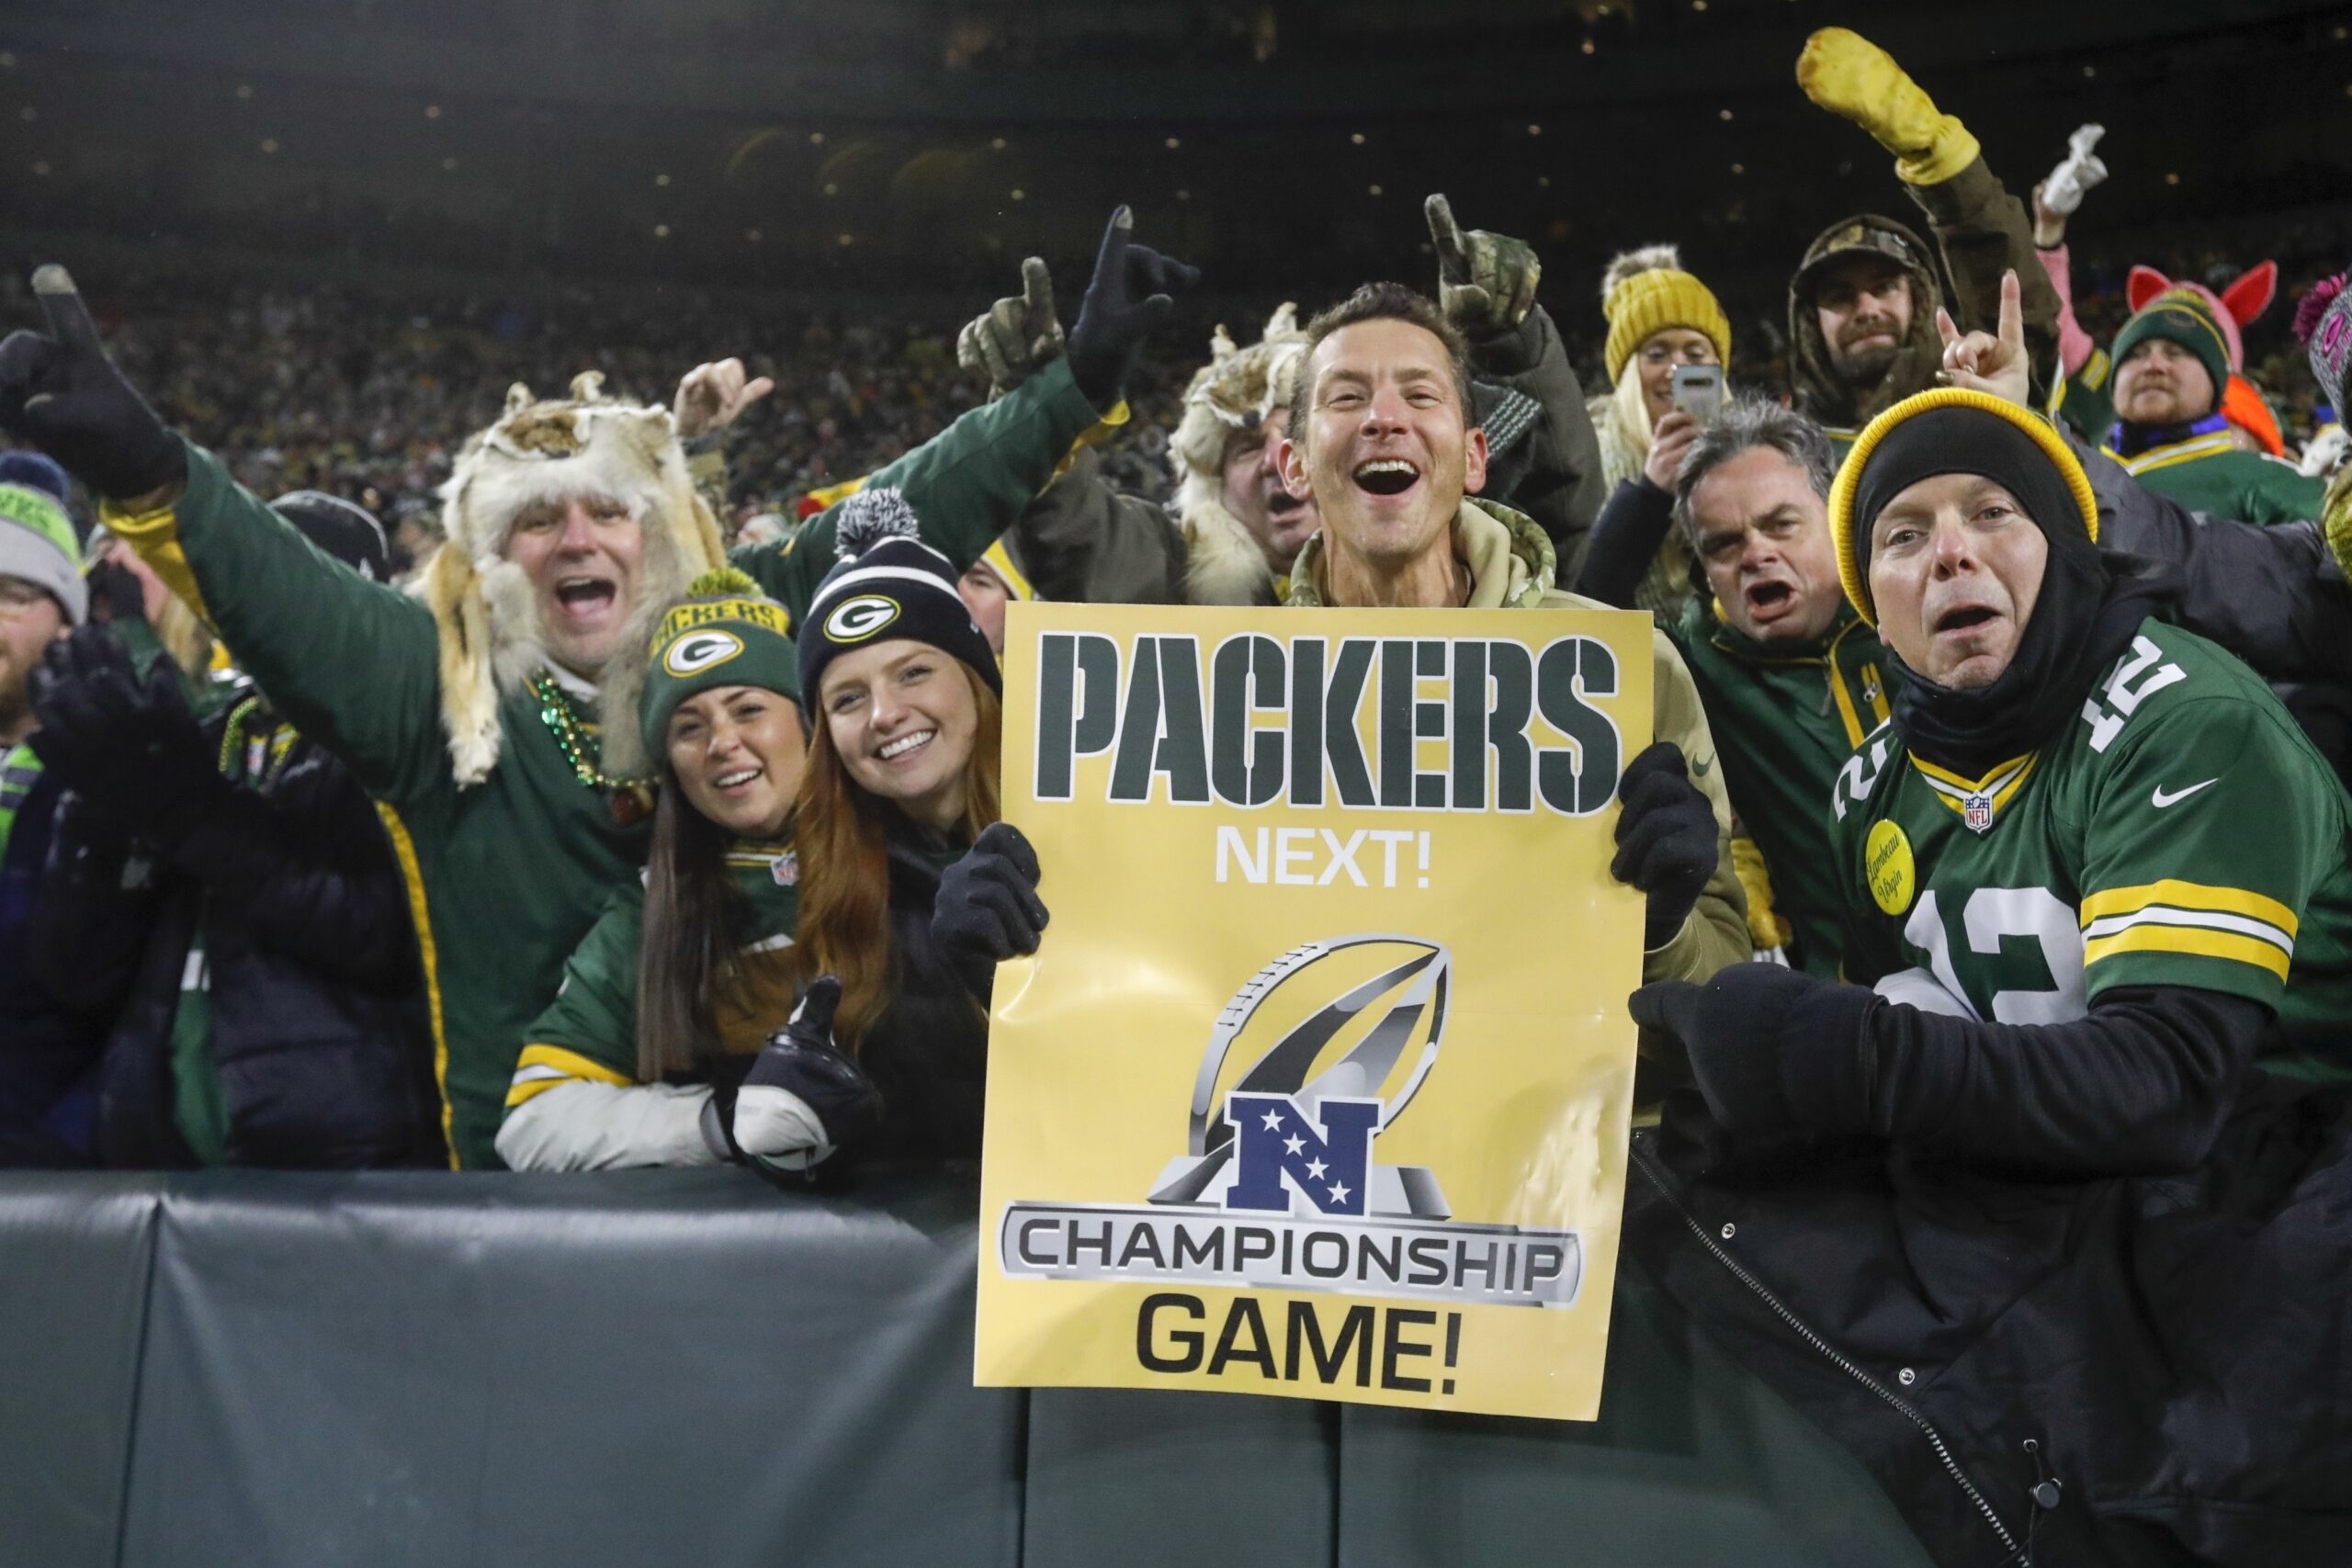 Packers fans celebrate divisional-round playoff win against Seahawks